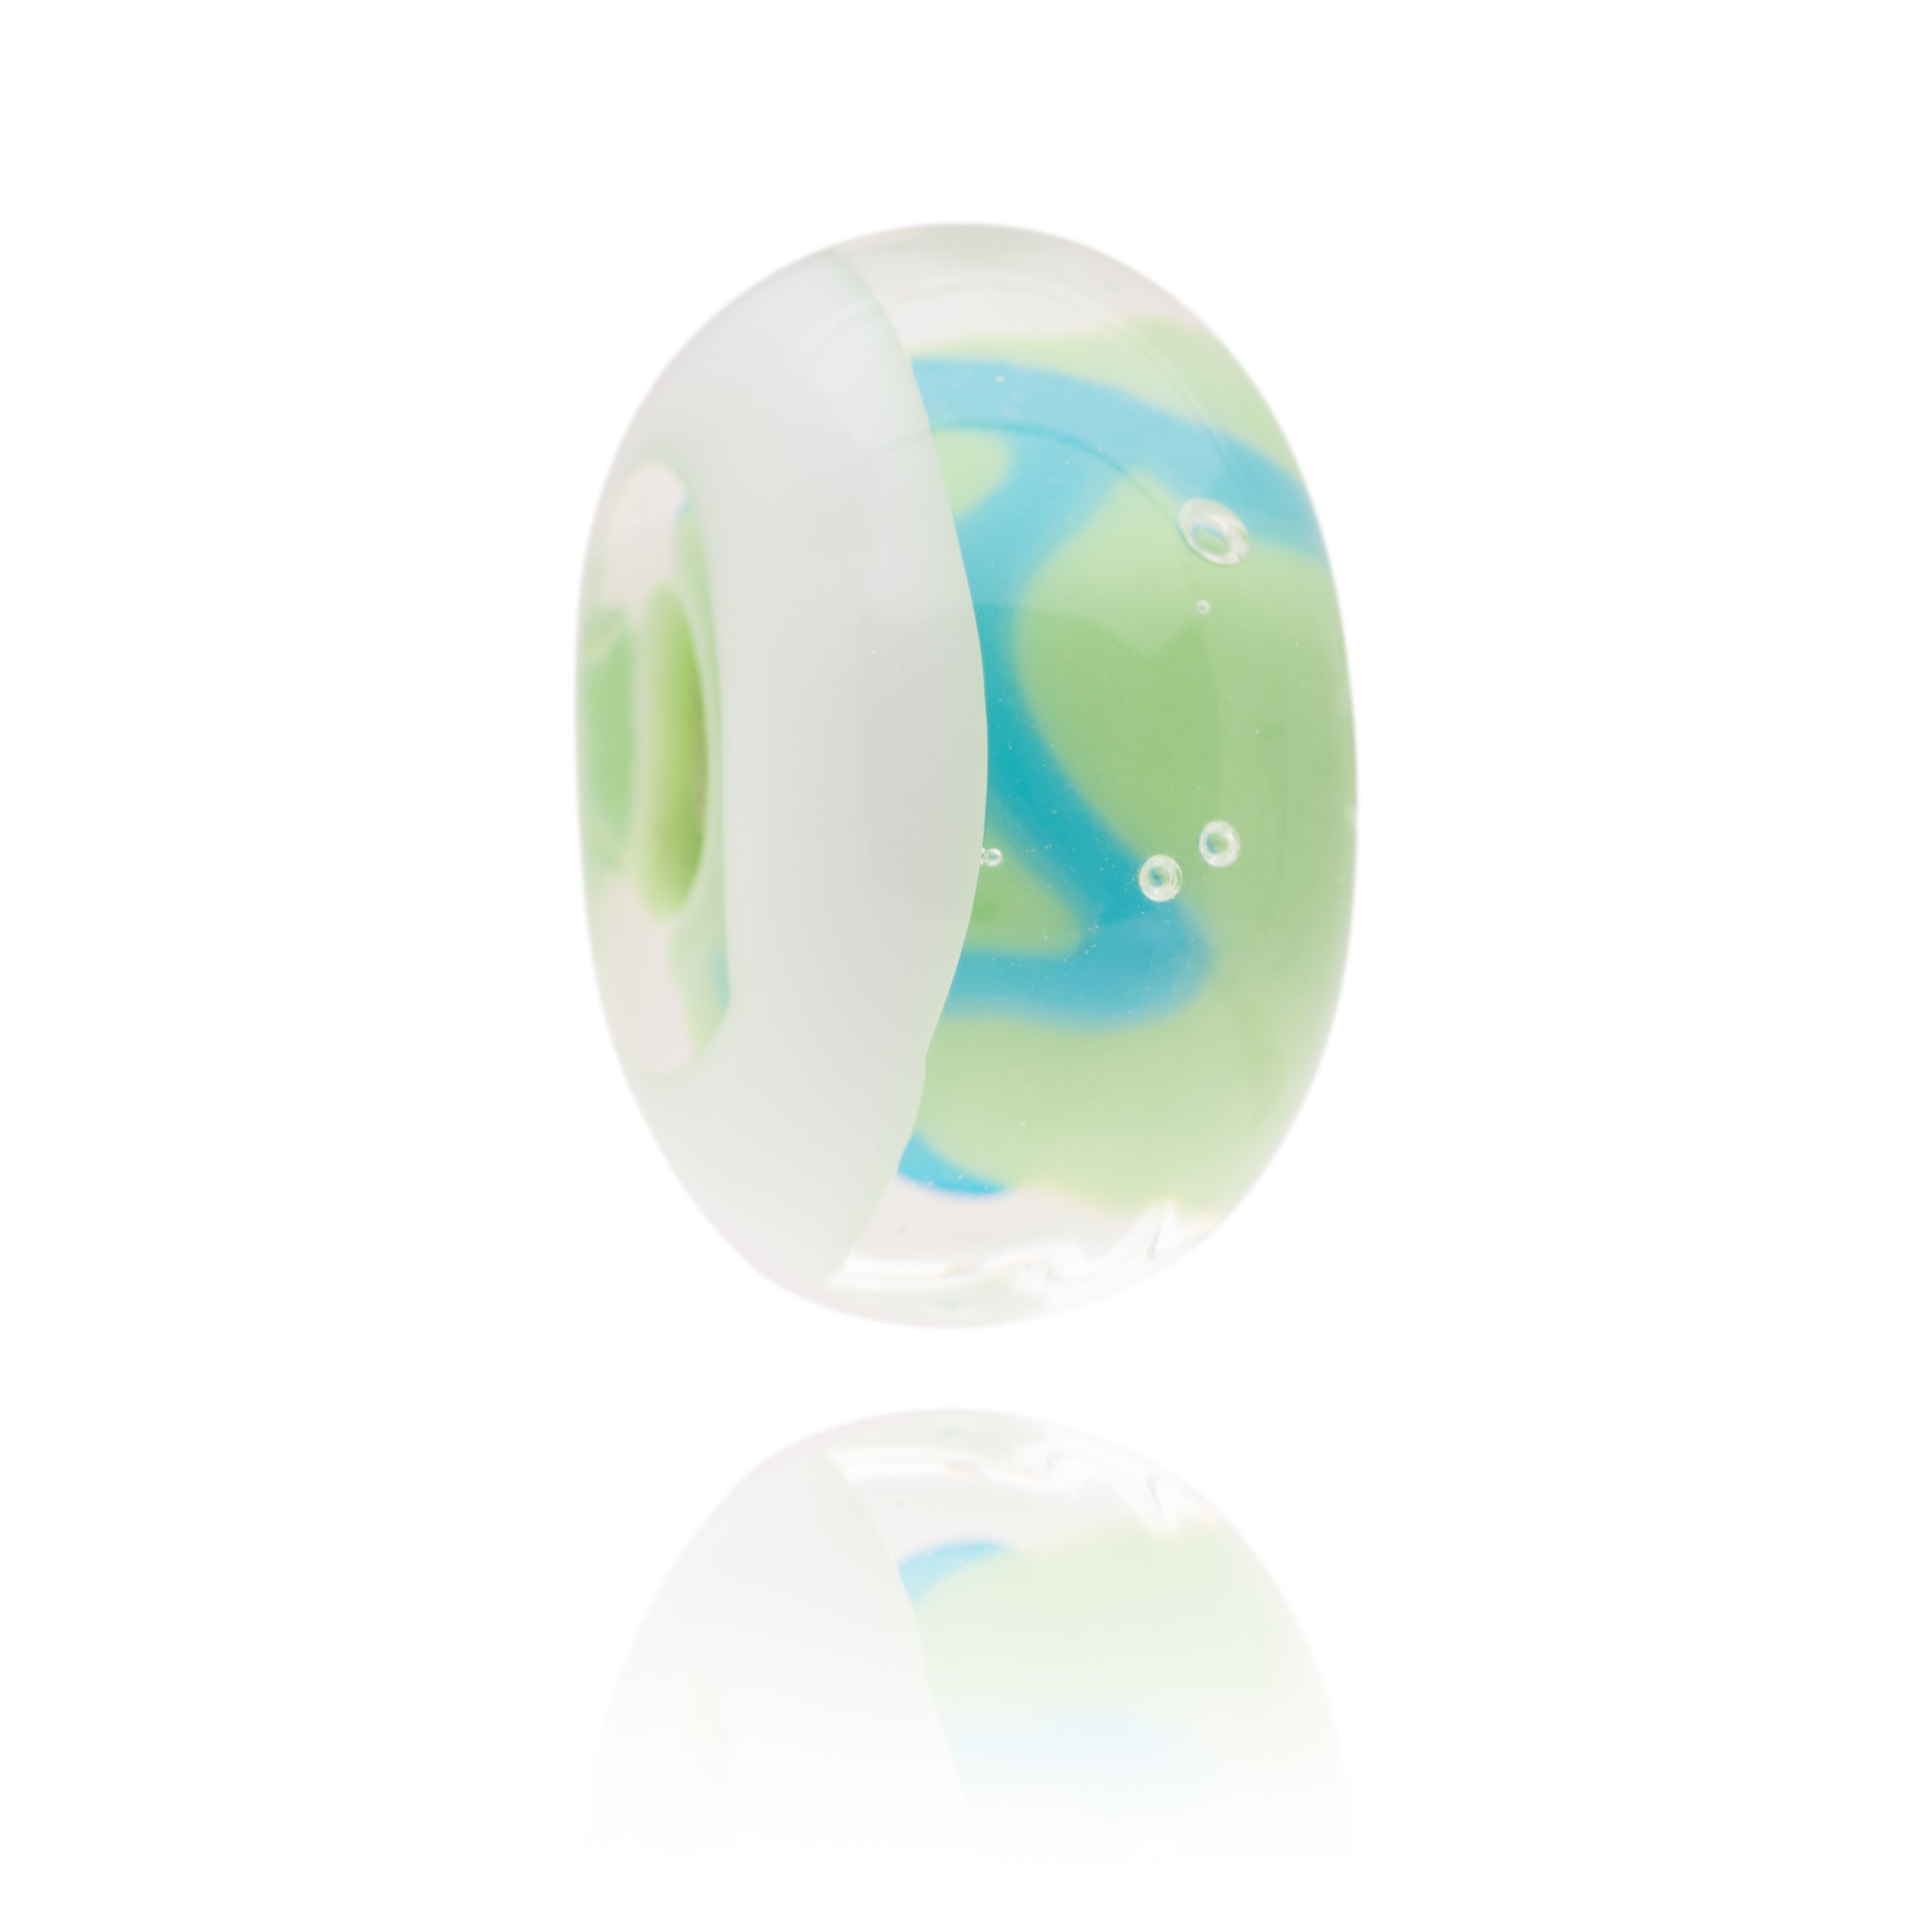 Blue, green and white Murano glass bead representing the beach of Cuckmere Haven in Sussex.